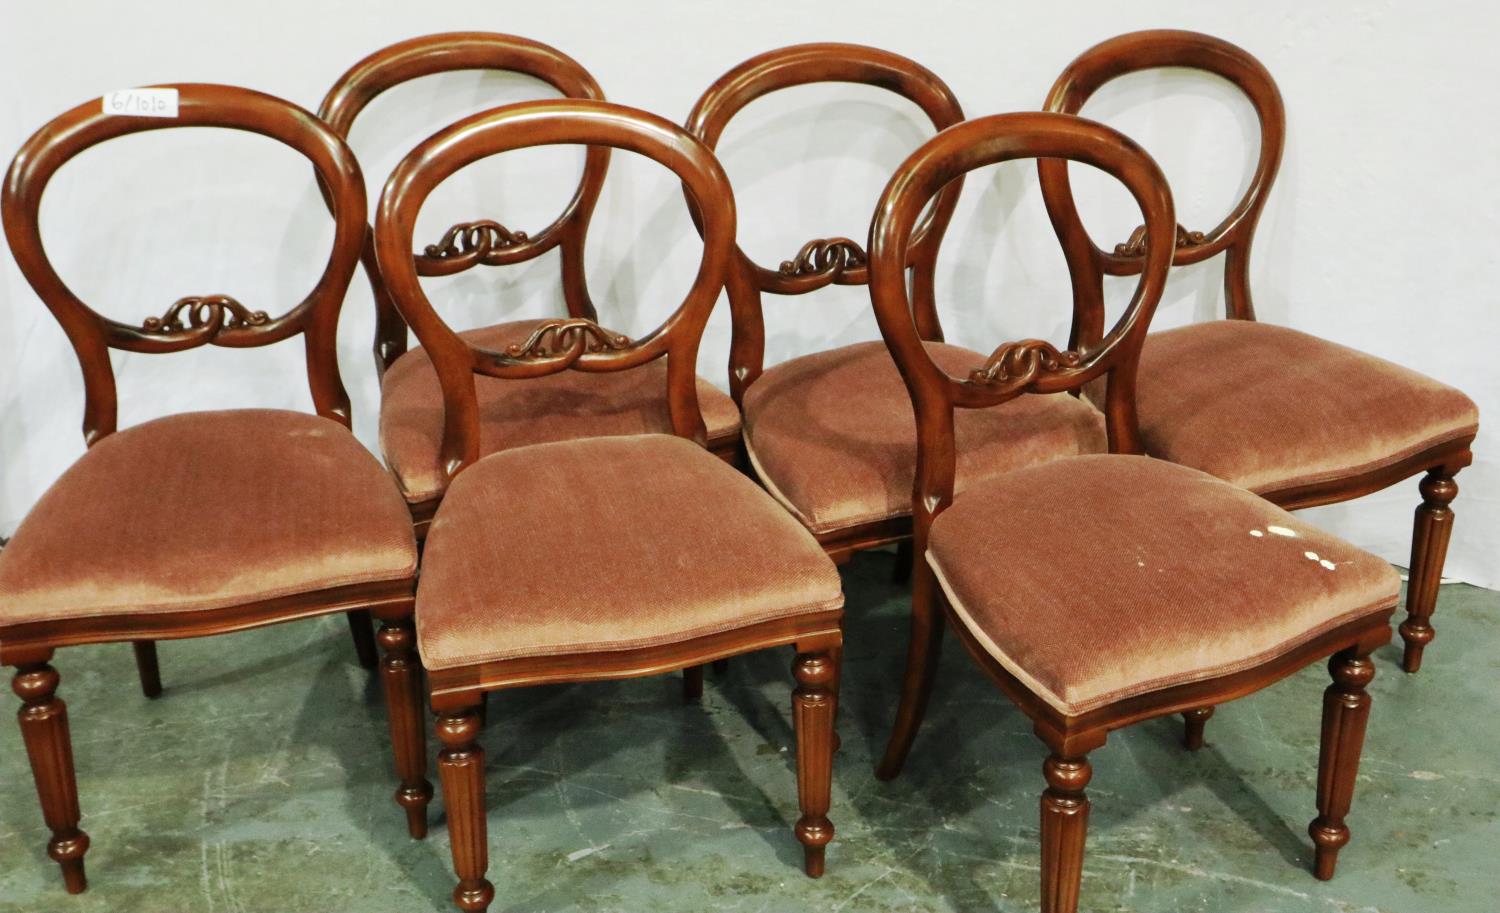 A set of six Victorian style balloon back dining chairs, each with upholstered seat. Not available